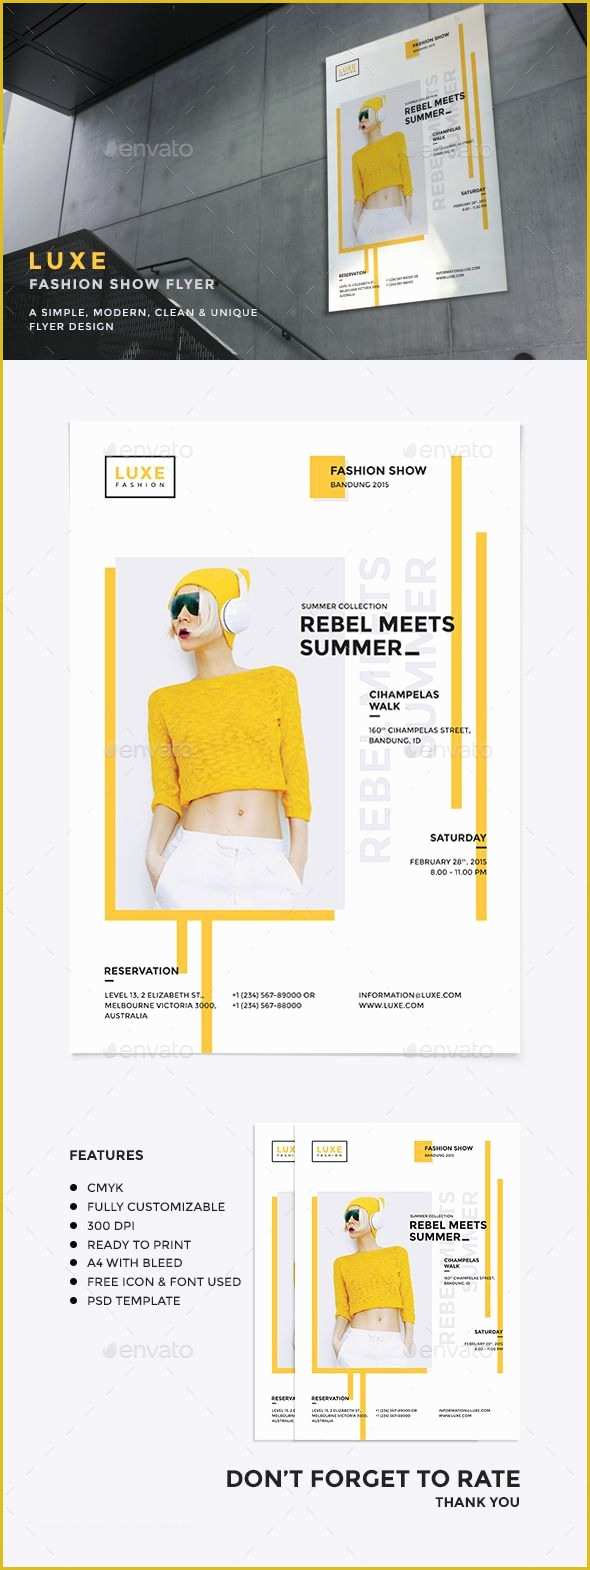 Free Fashion Show Flyer Template Of Luxe Fashion Show Flyer